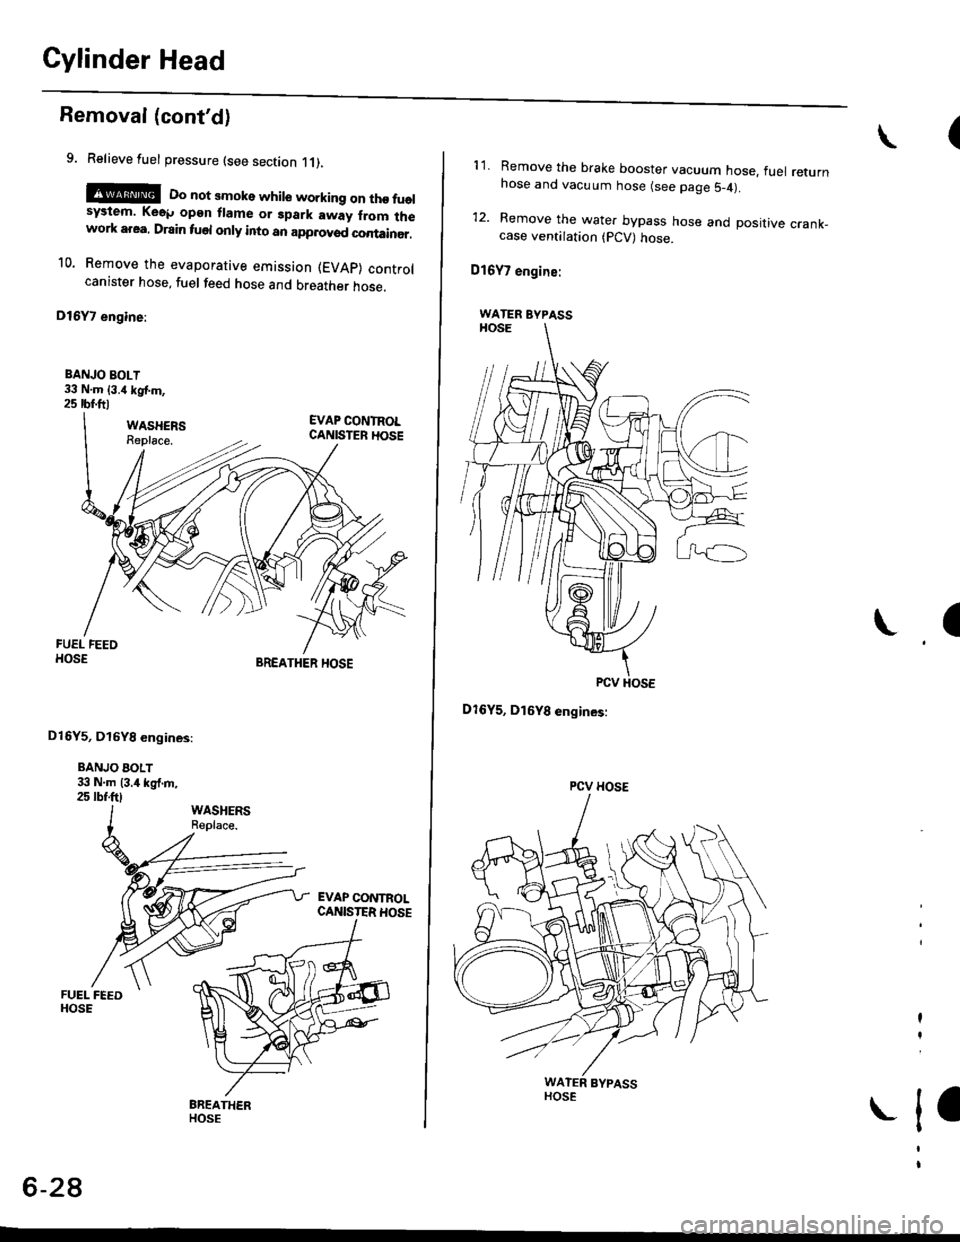 HONDA CIVIC 1996 6.G User Guide Cylinder Head
Removal (contd)
9. Relieve fuel pressure (see section 11),
E@E Do not smoke while working on tho fuelsystem. Ke6p opgn flame or gpark away from lhework area, Drain fuel only into an app